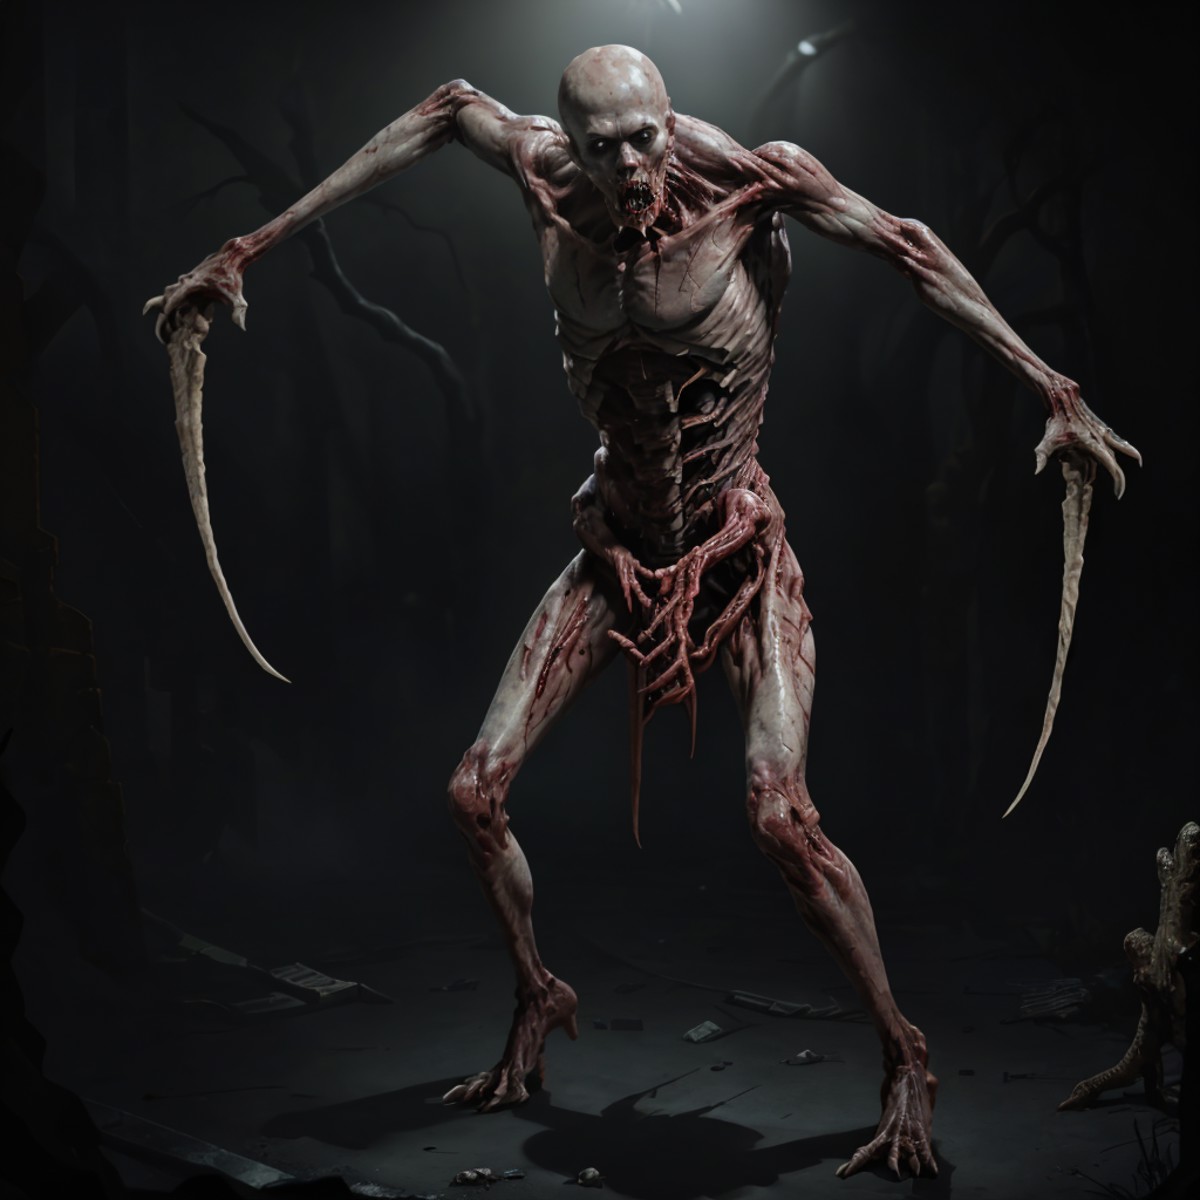 deadspaceslasher standing in a dark room, dramatic lighting, flesh, gore, horror, streched out limbs with bones attached t...